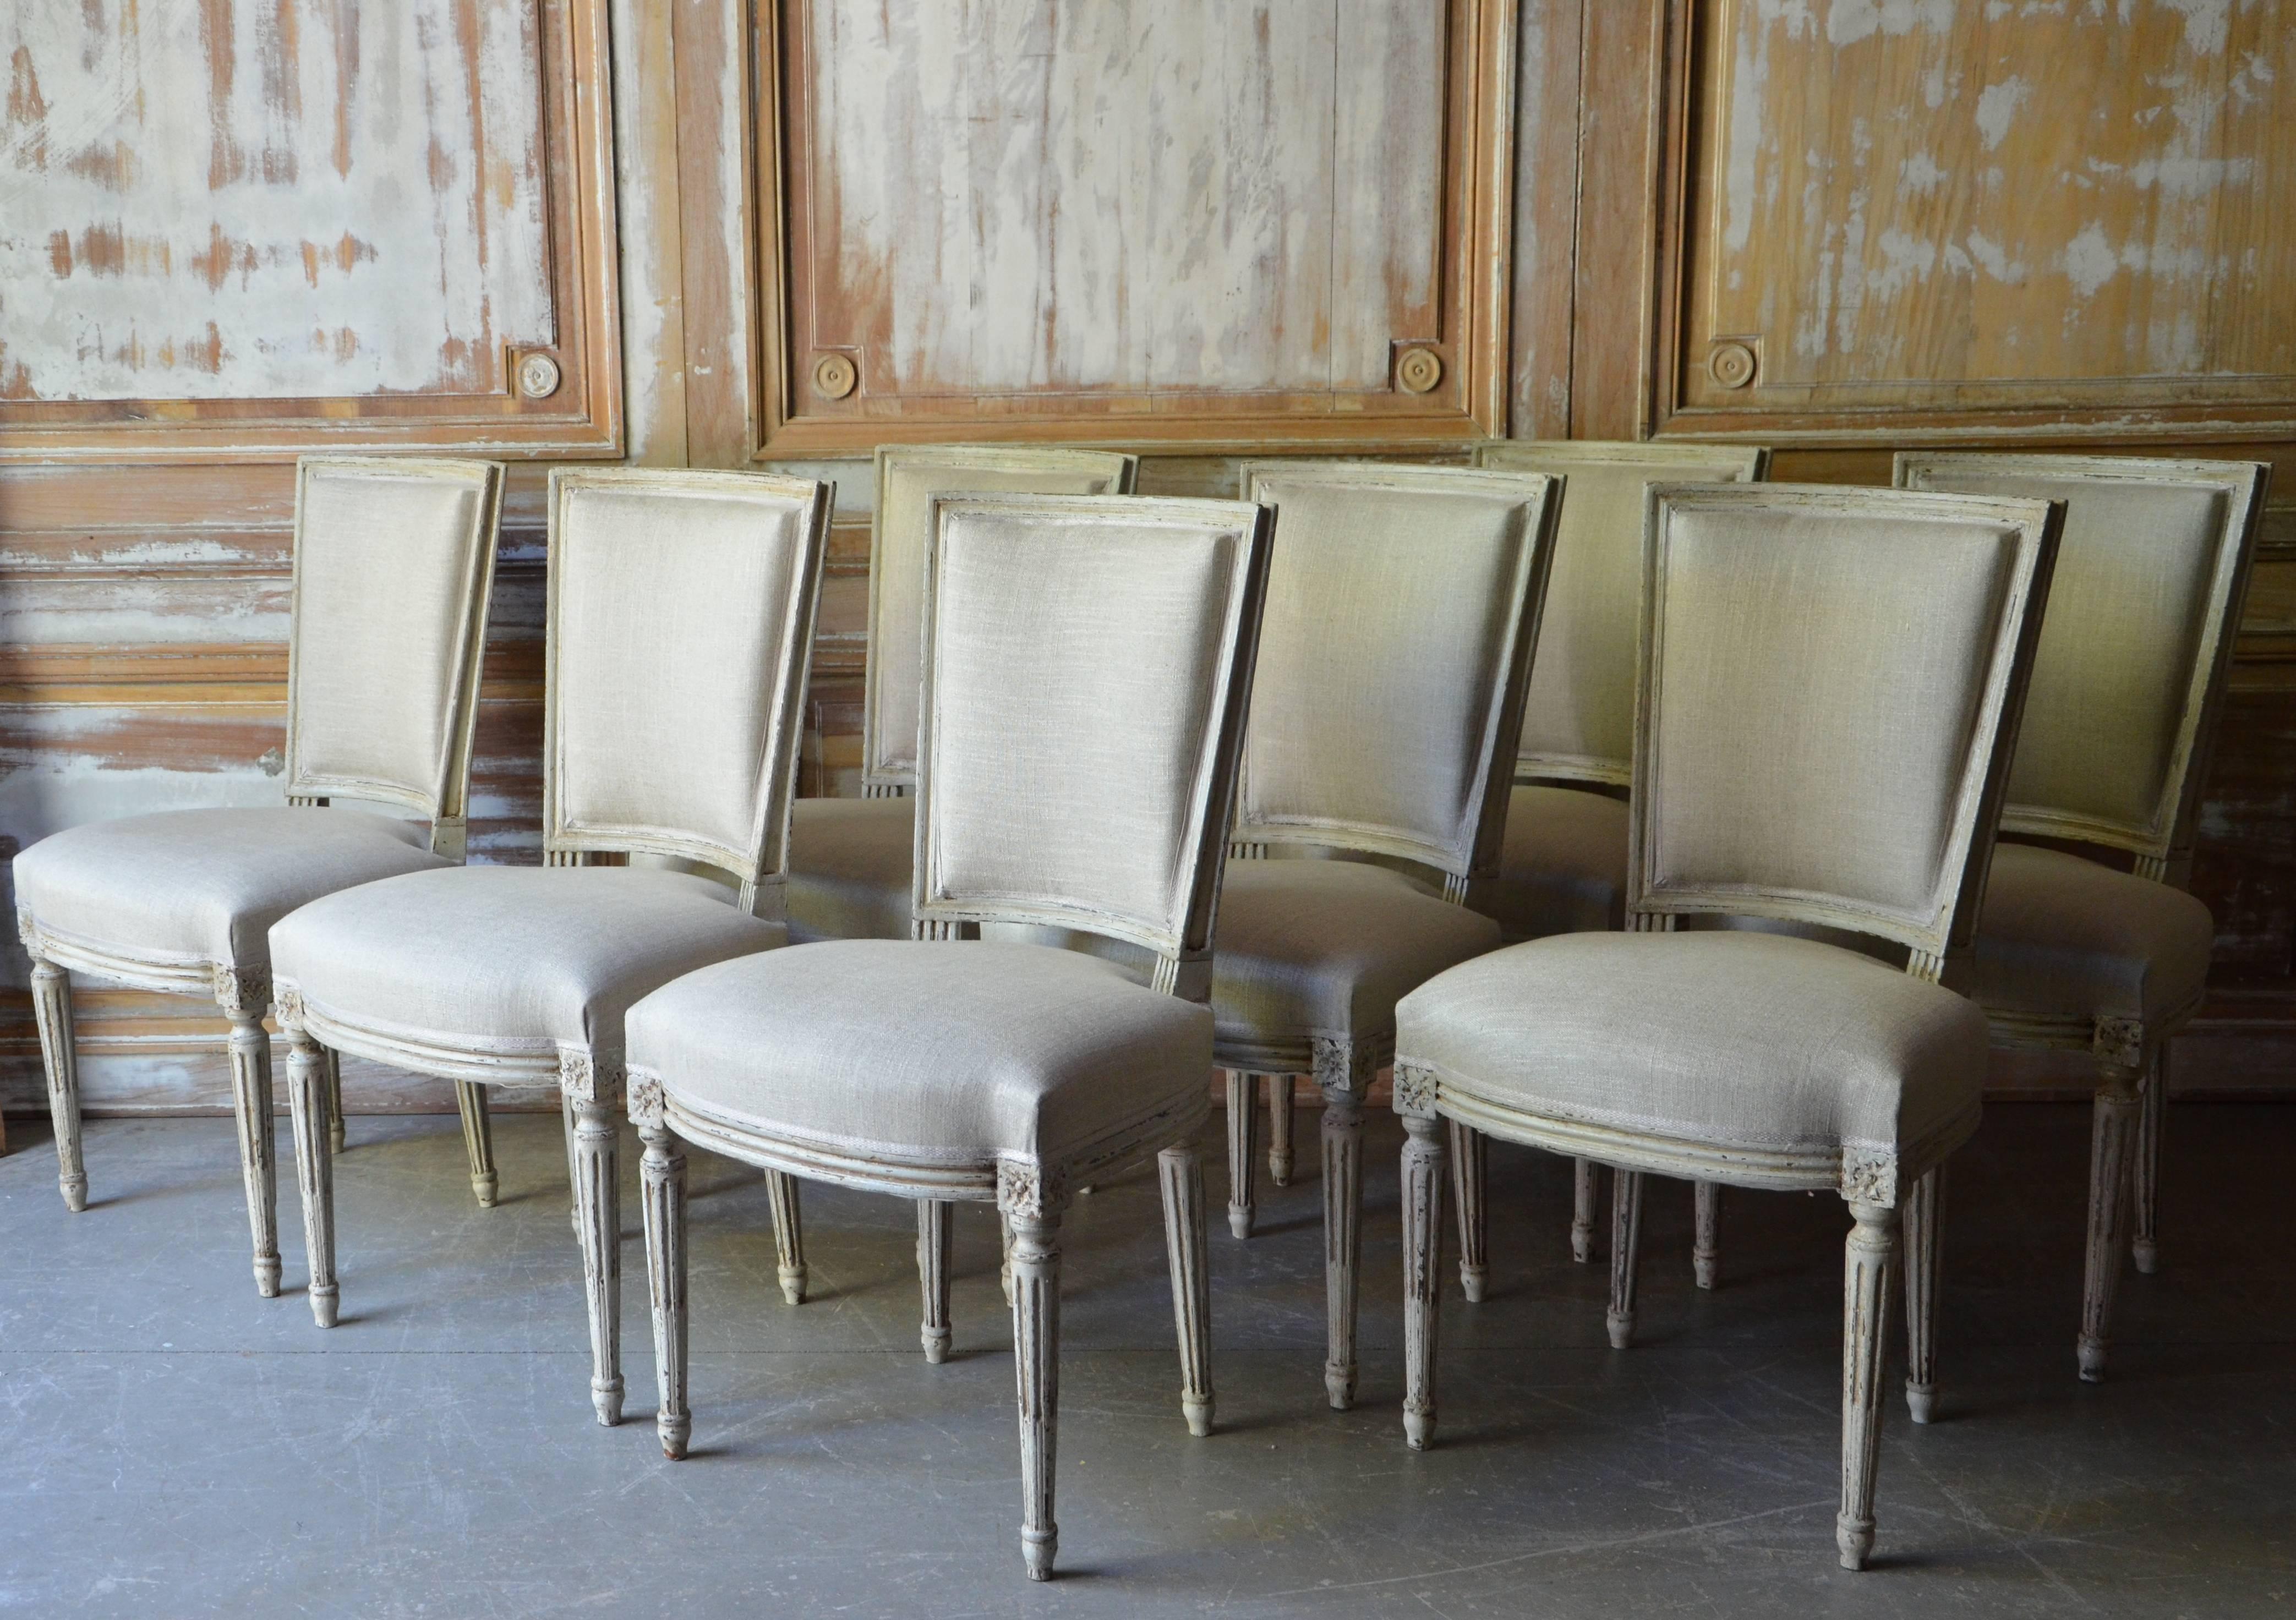 Set of eight, Louis XV style chairs with carved apron and corner blocks on turned tapering legs in worn white or cream patina. Upholstery in palest grey linen,
France, circa 1900

